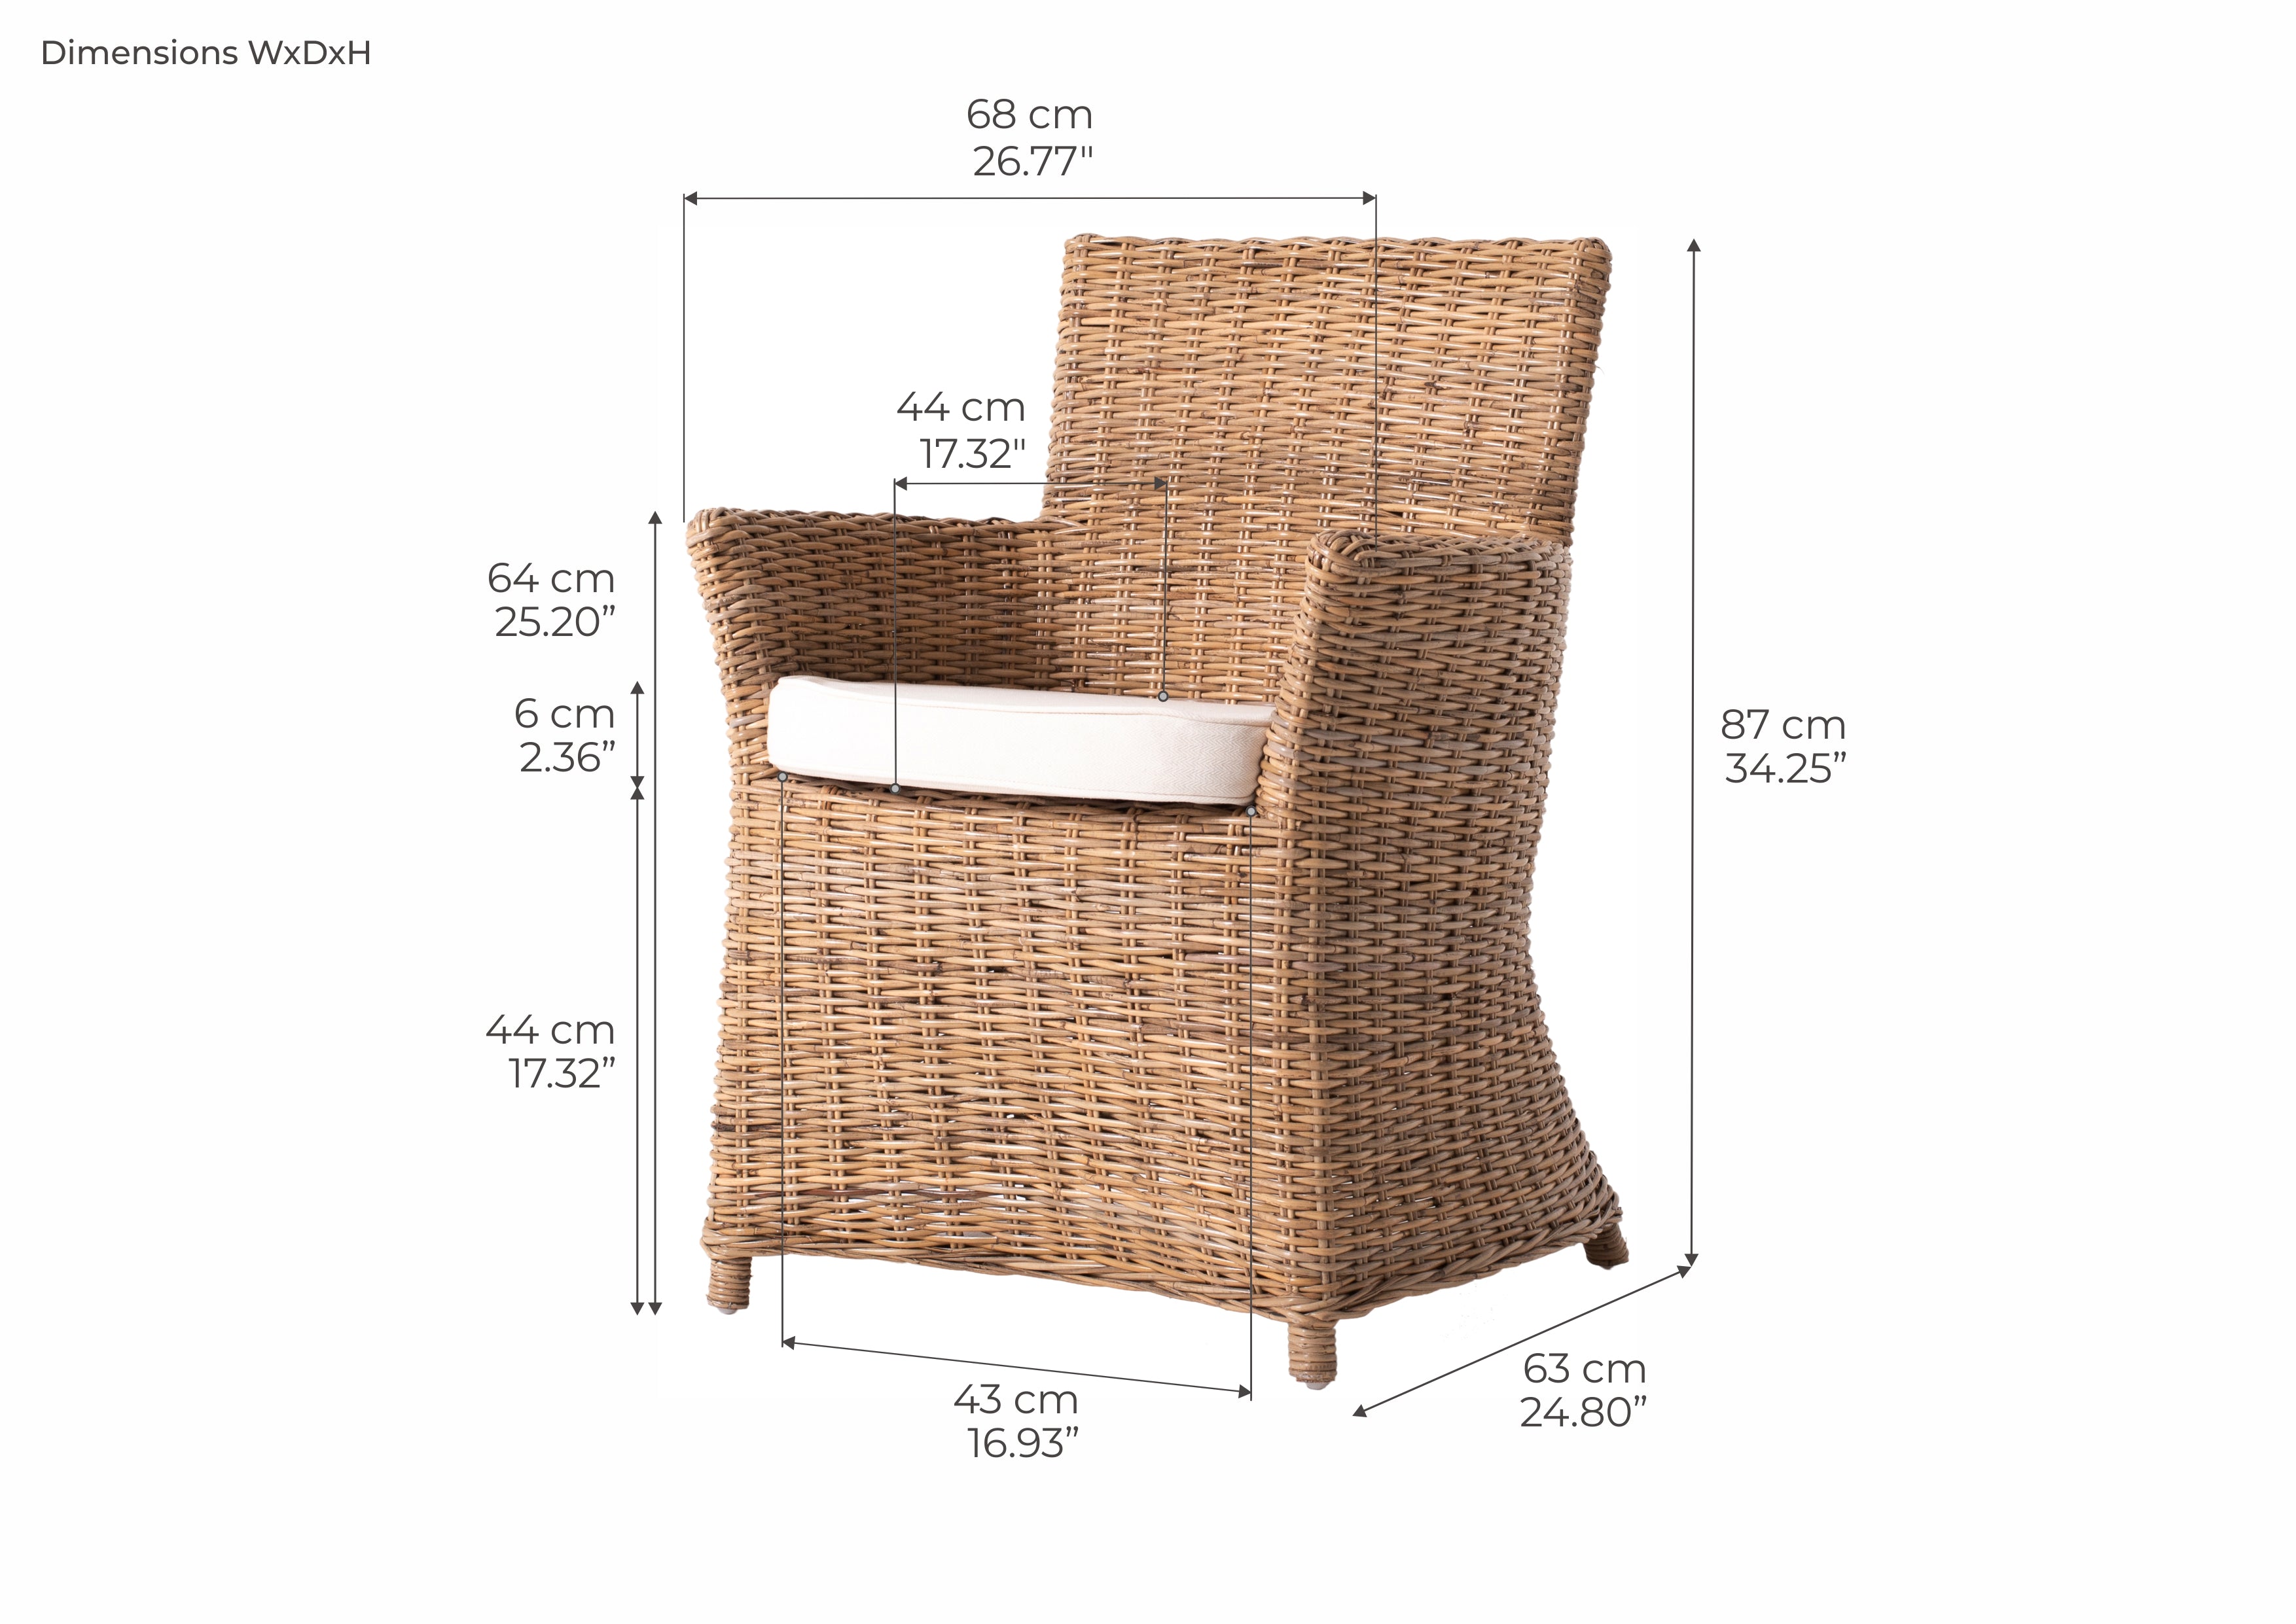 BISHOP Dining Chair Dimensions